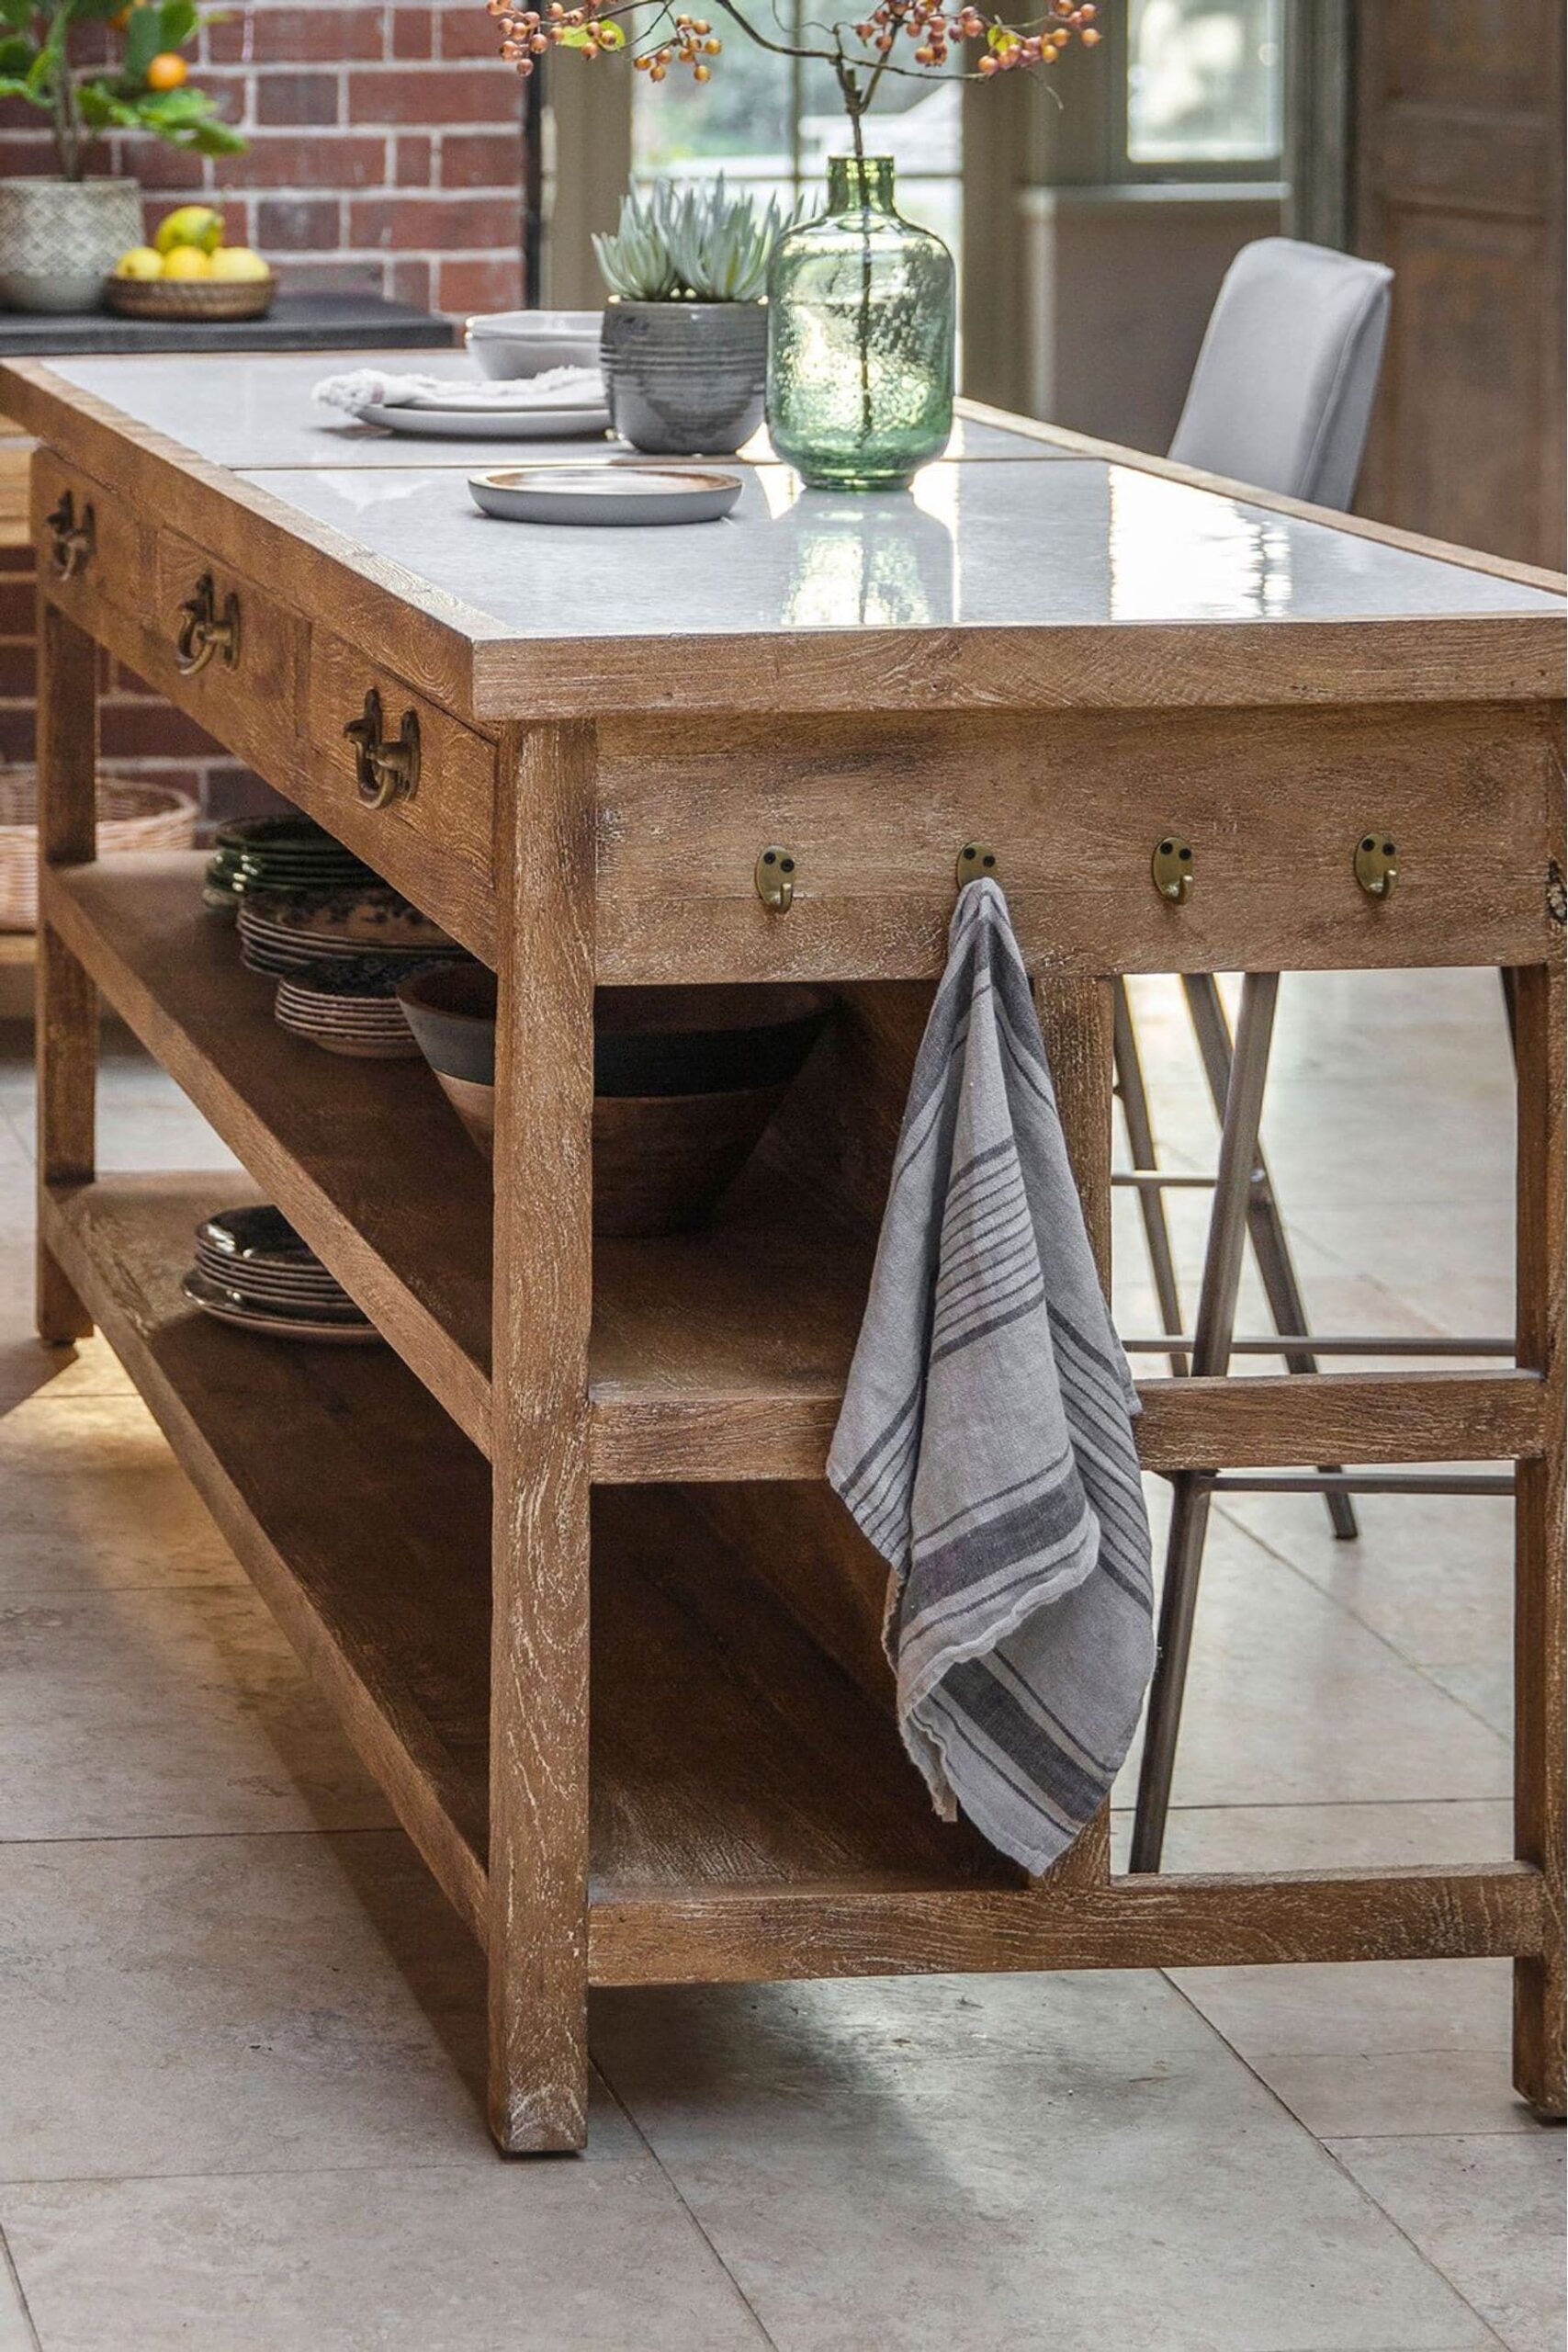 The Versatility and Practicality of a Kitchen Island Table for Modern Homes